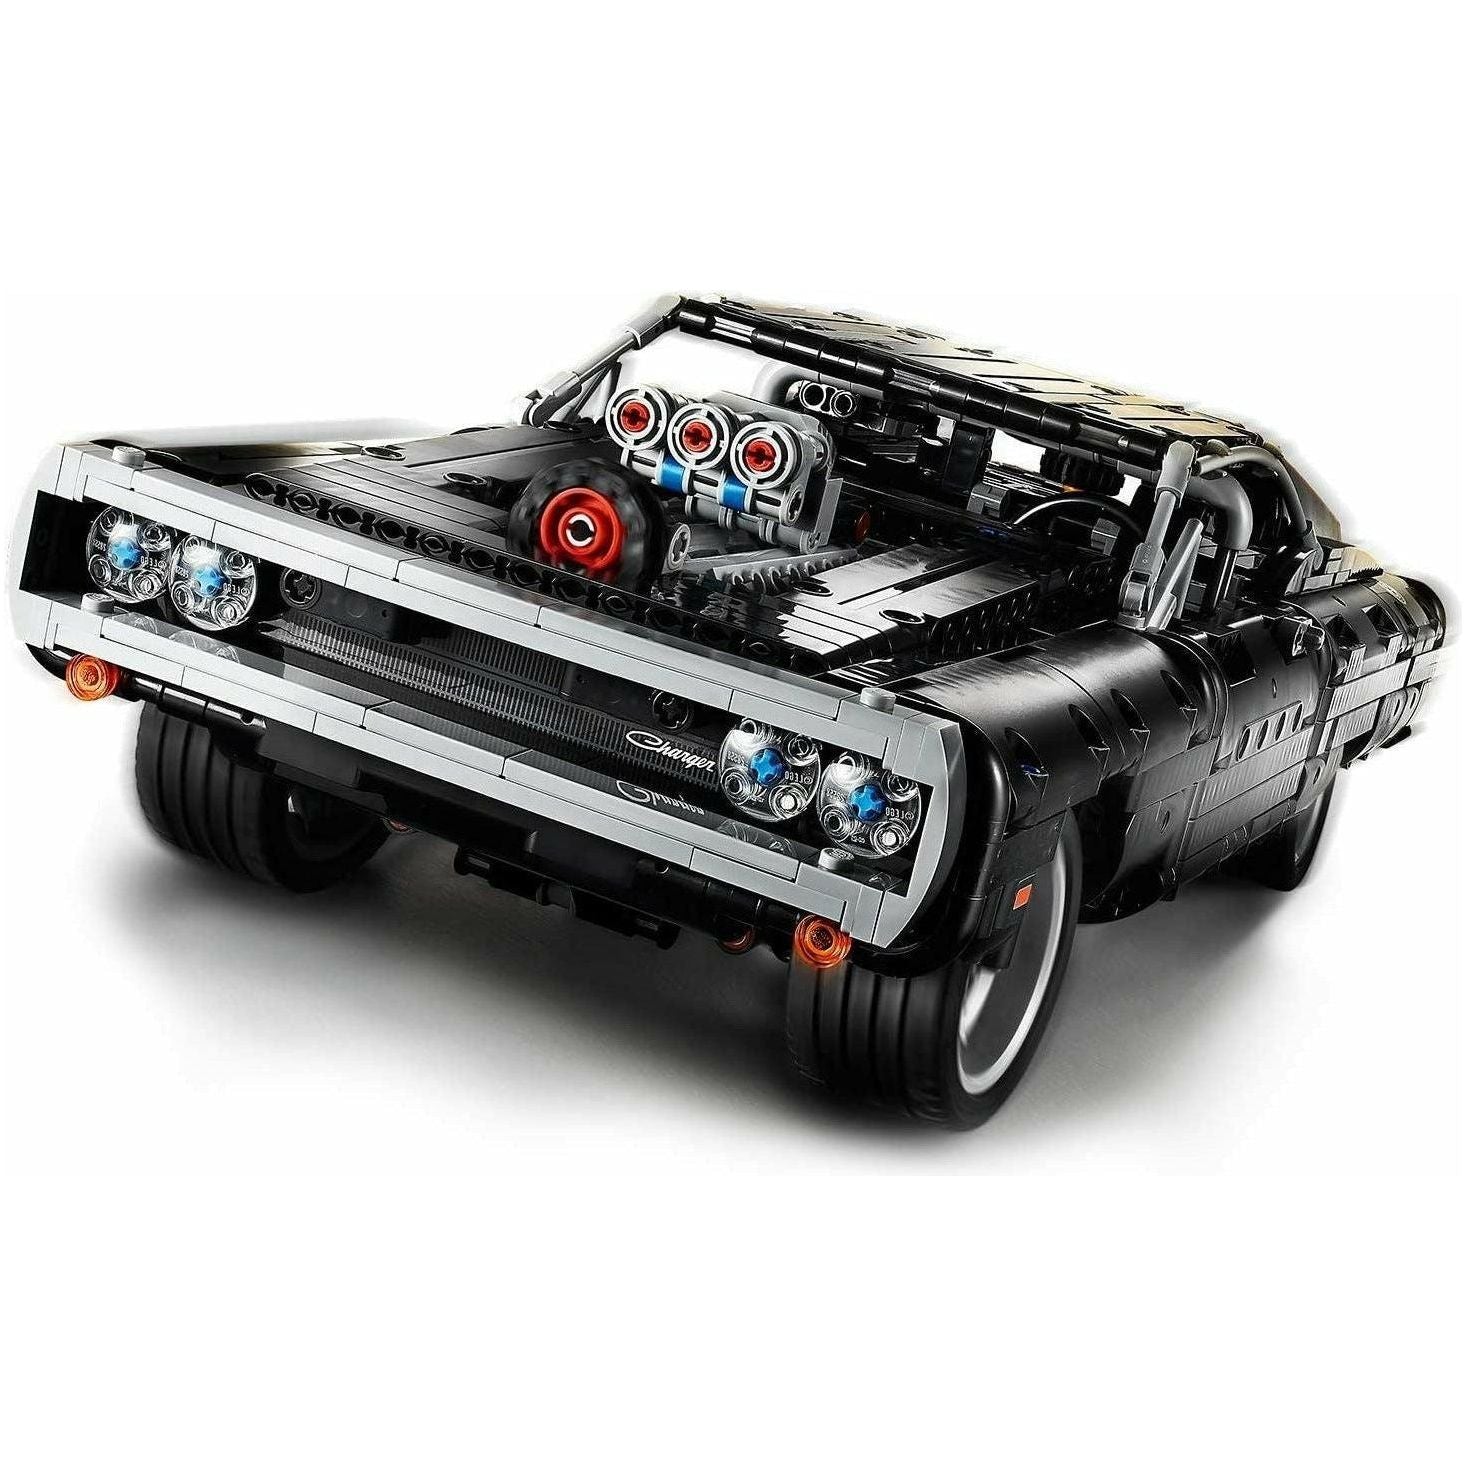 LEGO Technic Fast & Furious Dom's Dodge Charger 42111 Race Car Building Set (1,077 Pieces) - BumbleToys - 14 Years & Up, 8+ Years, 8-13 Years, Boys, Cars, LEGO, OXE, Pre-Order, Technic